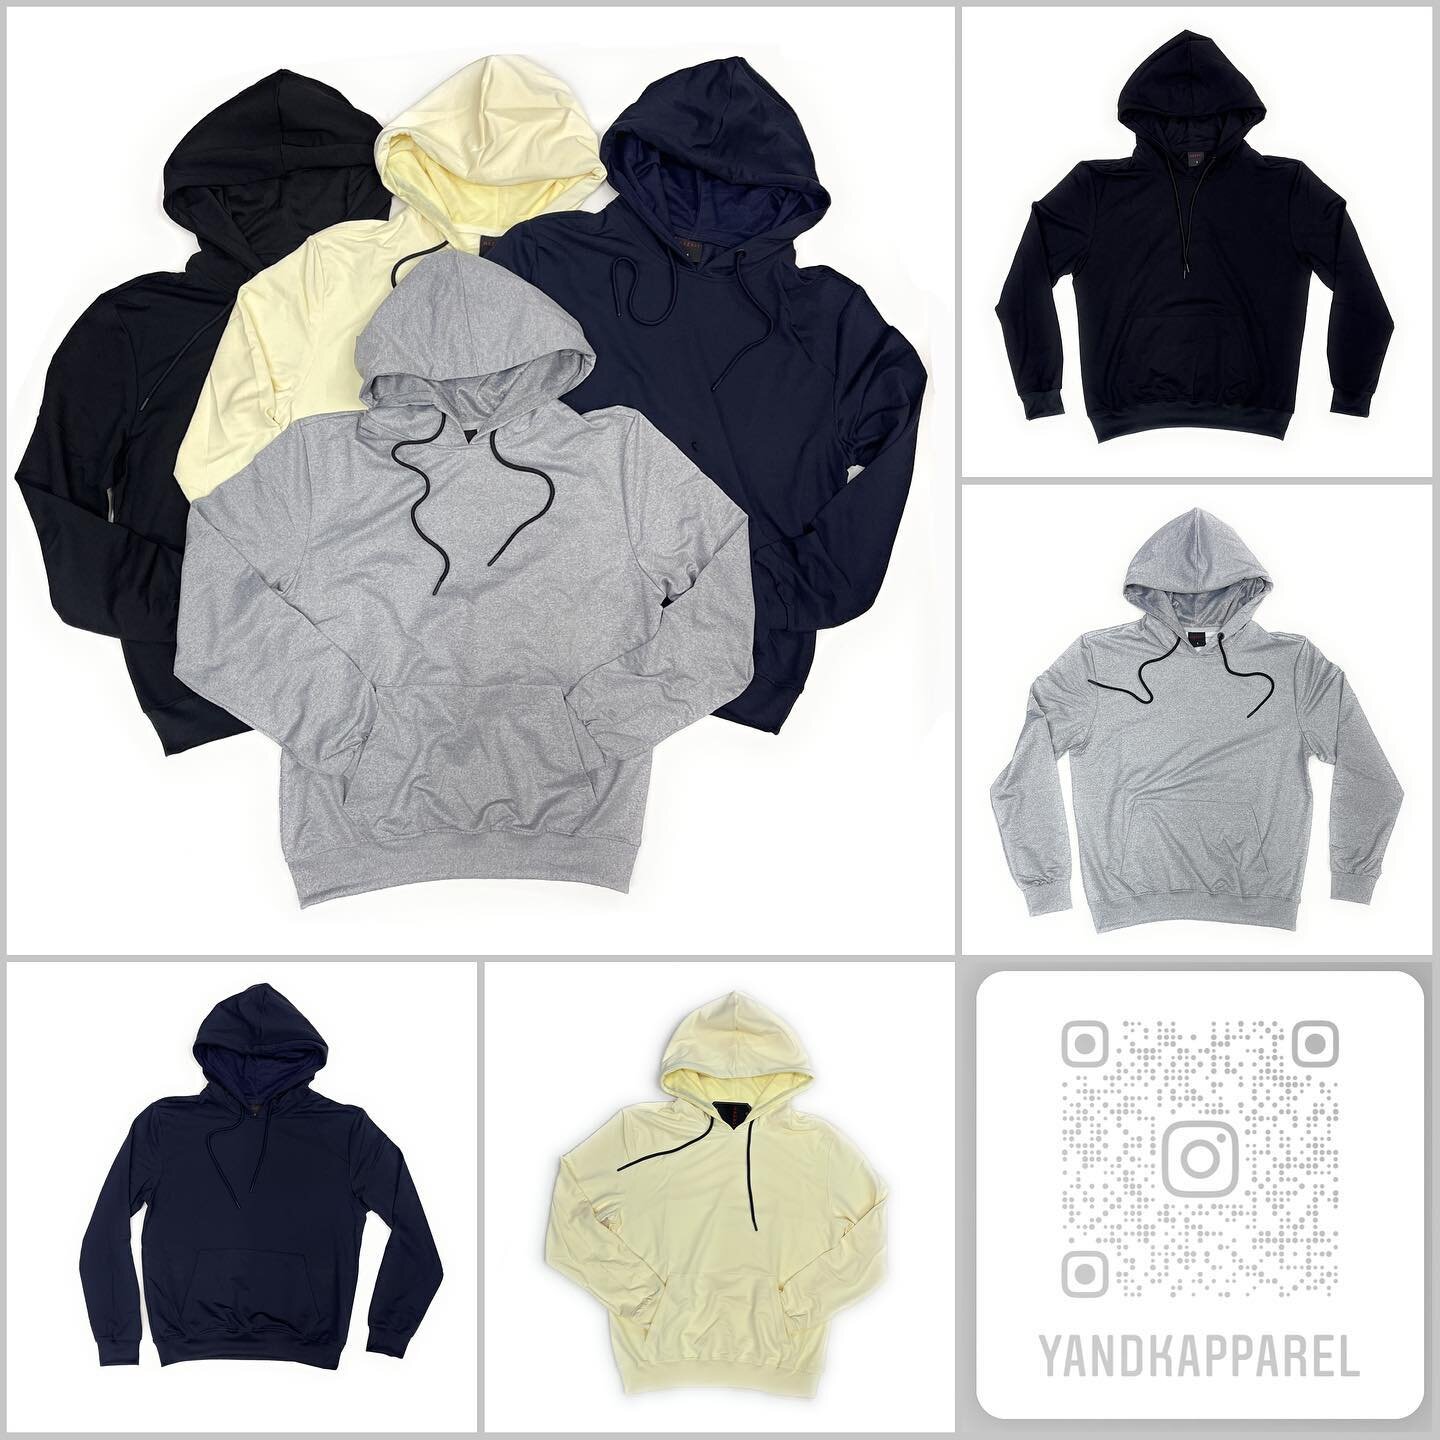 **Exclusive**
High end plain lightweight pullover hoodies , great for printing, sublimation, and embroidery 
100% Polyester 
4 Colors -Black, Grey, Cream, and Navy Blue
Sizes= S, M, L, XL, XXL
#hoodies #brand #wholesale #retail #yandkapparel #newyork